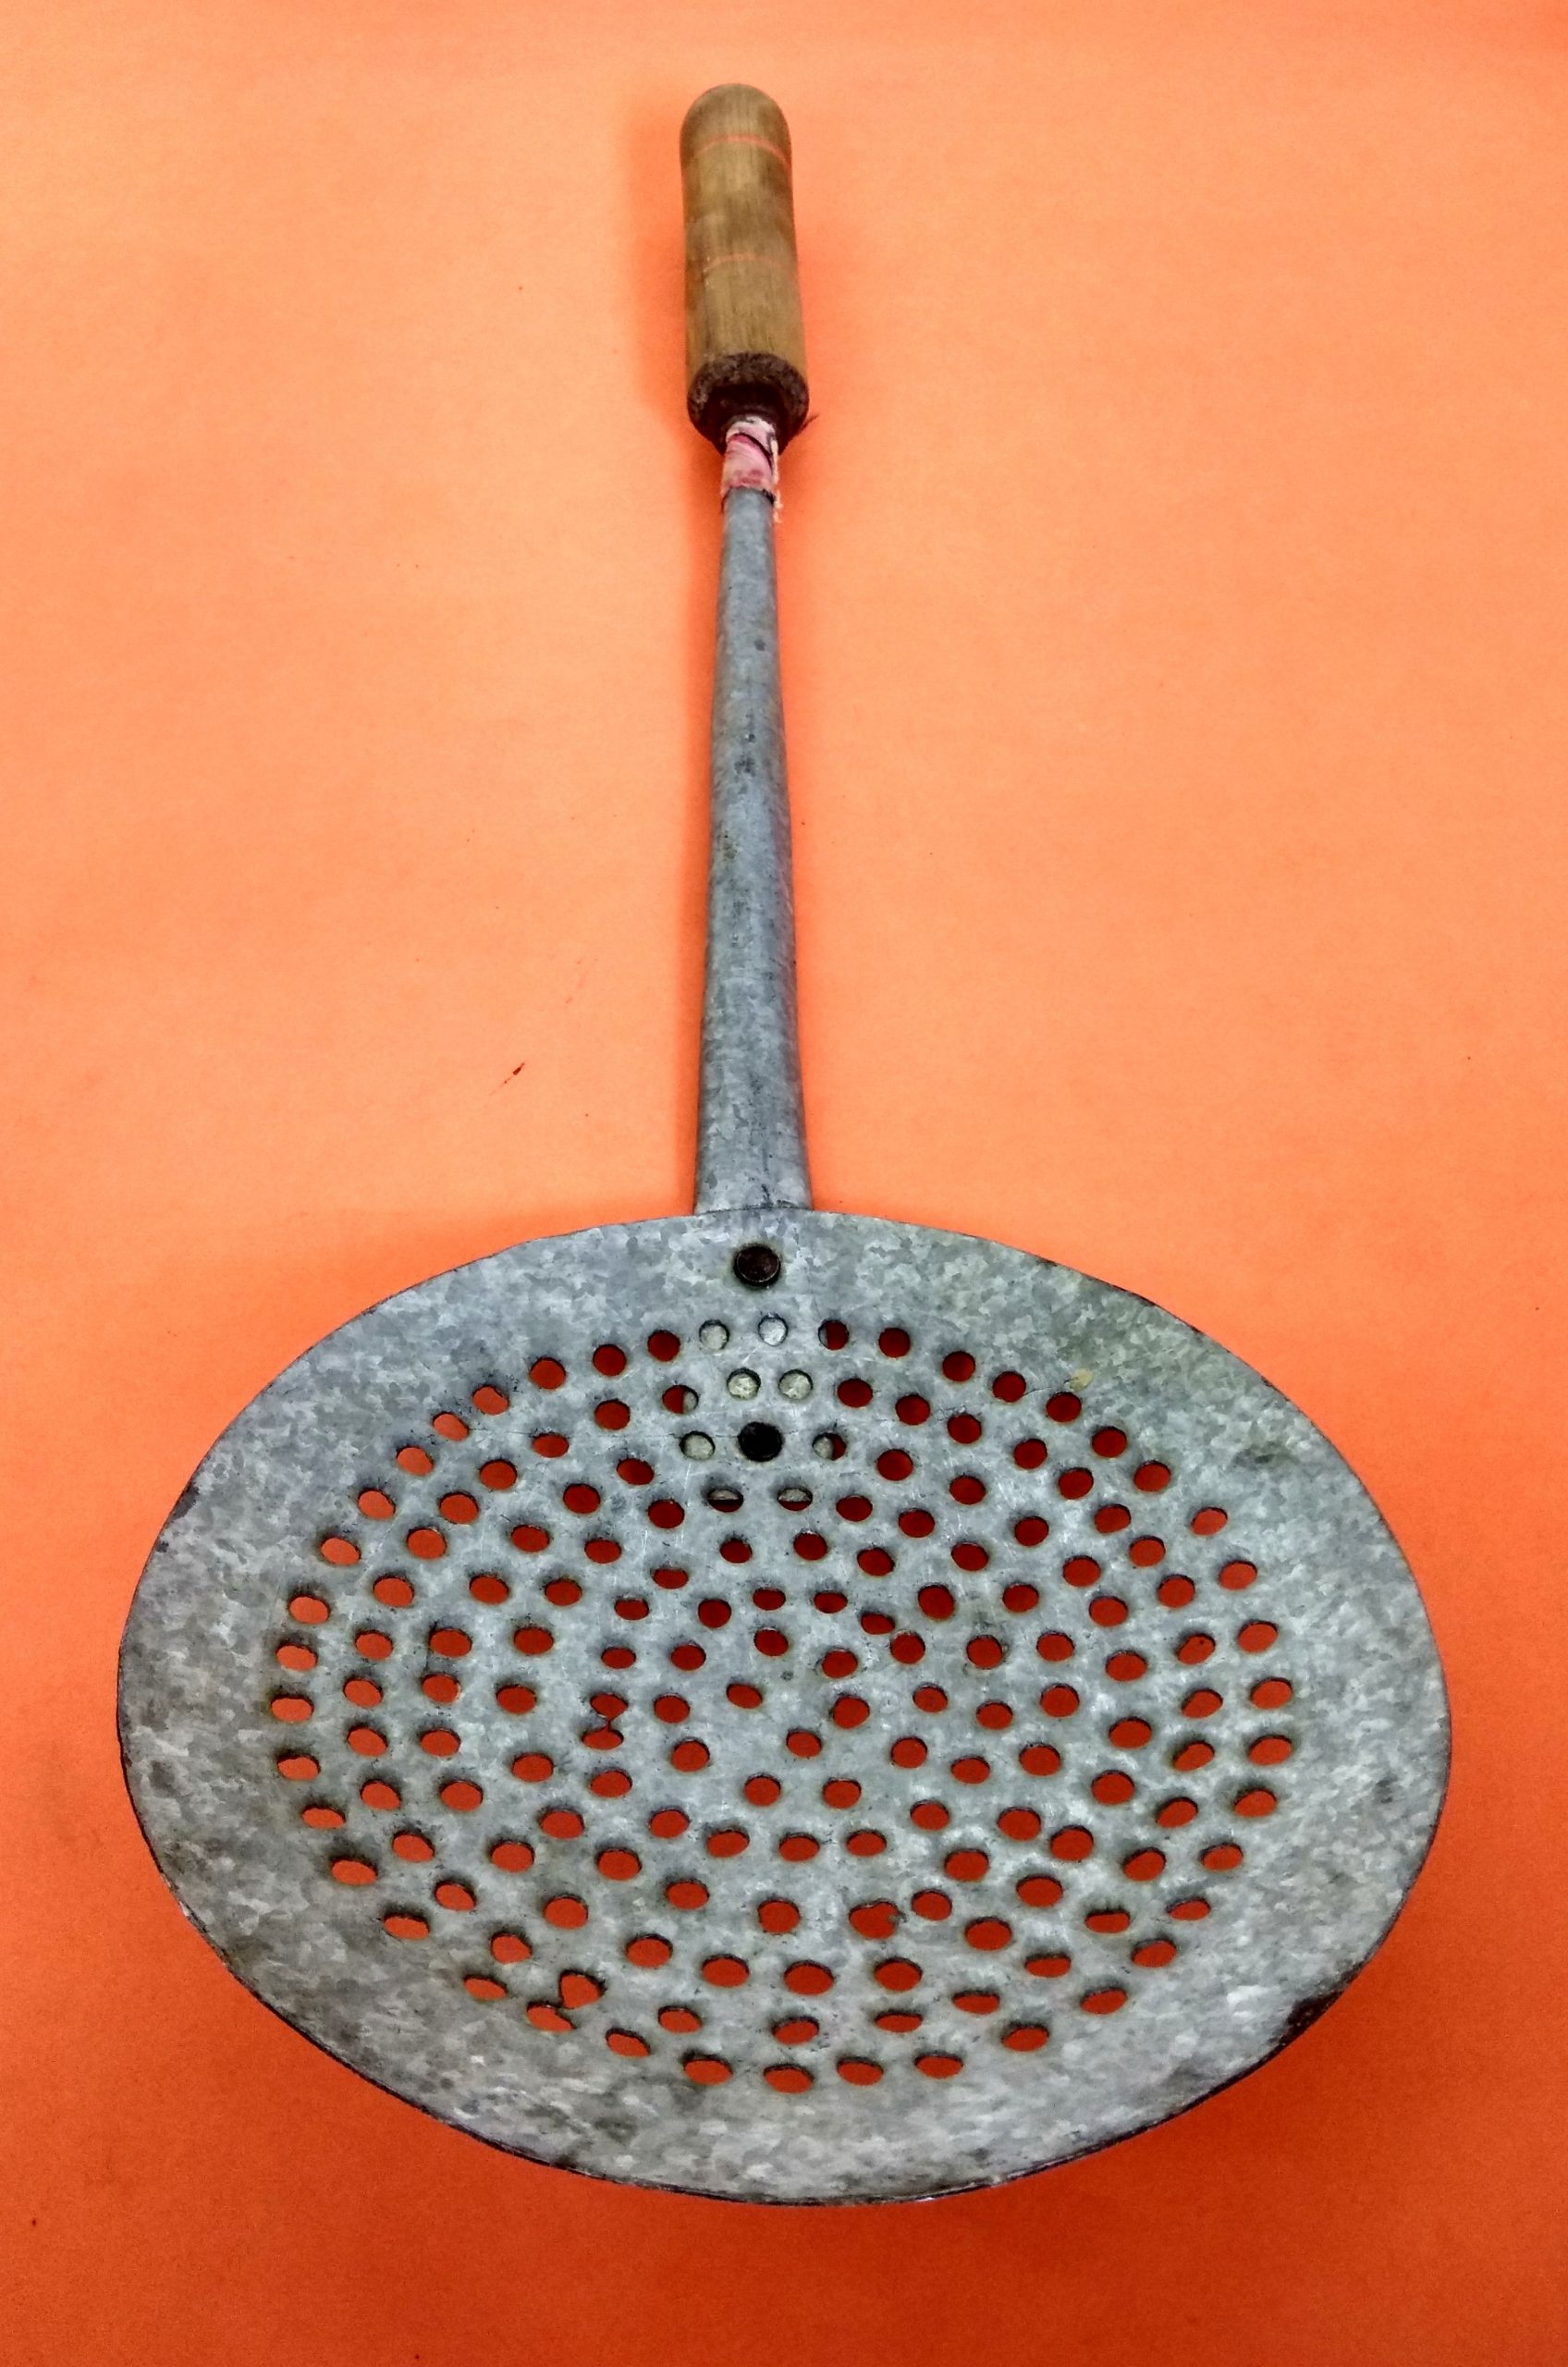 A long handle strainer